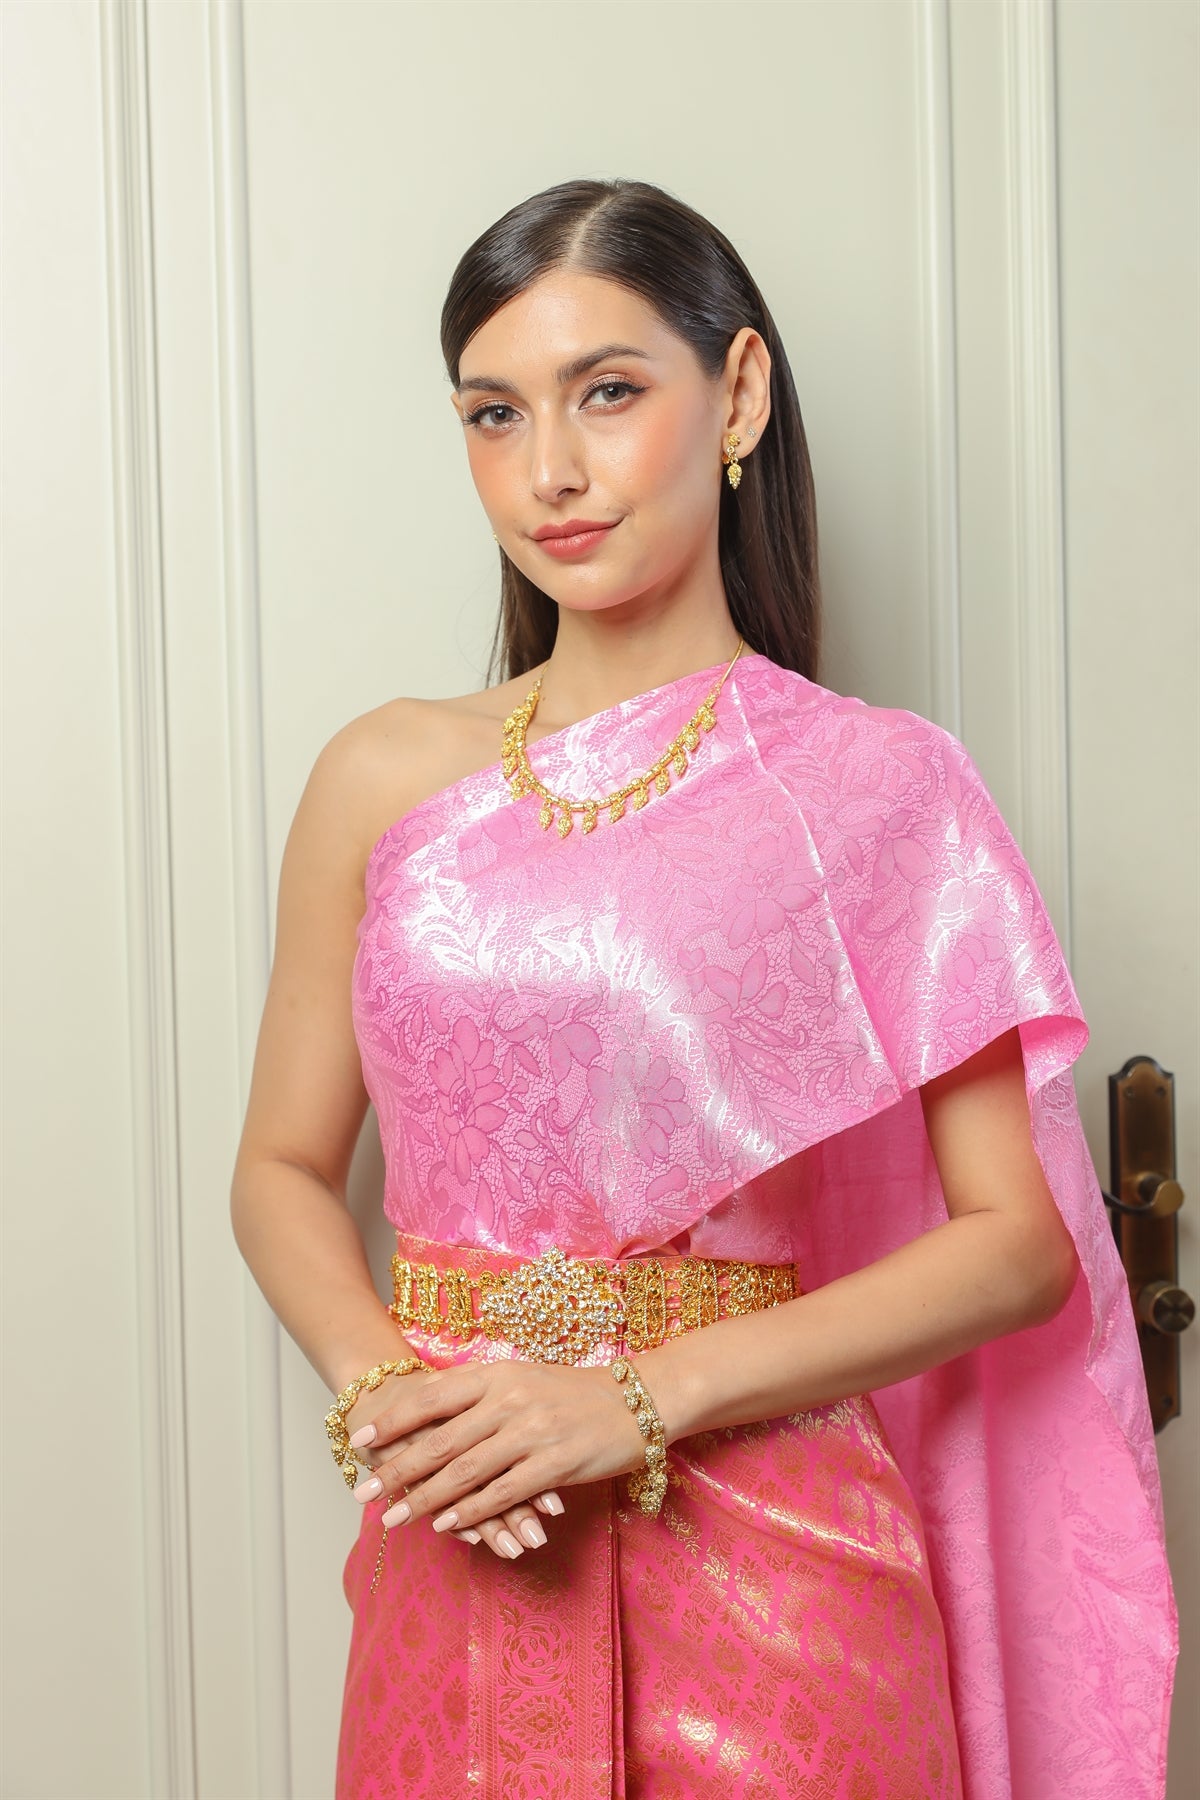 A woman posing in her traditional Thai dress and jewelry.